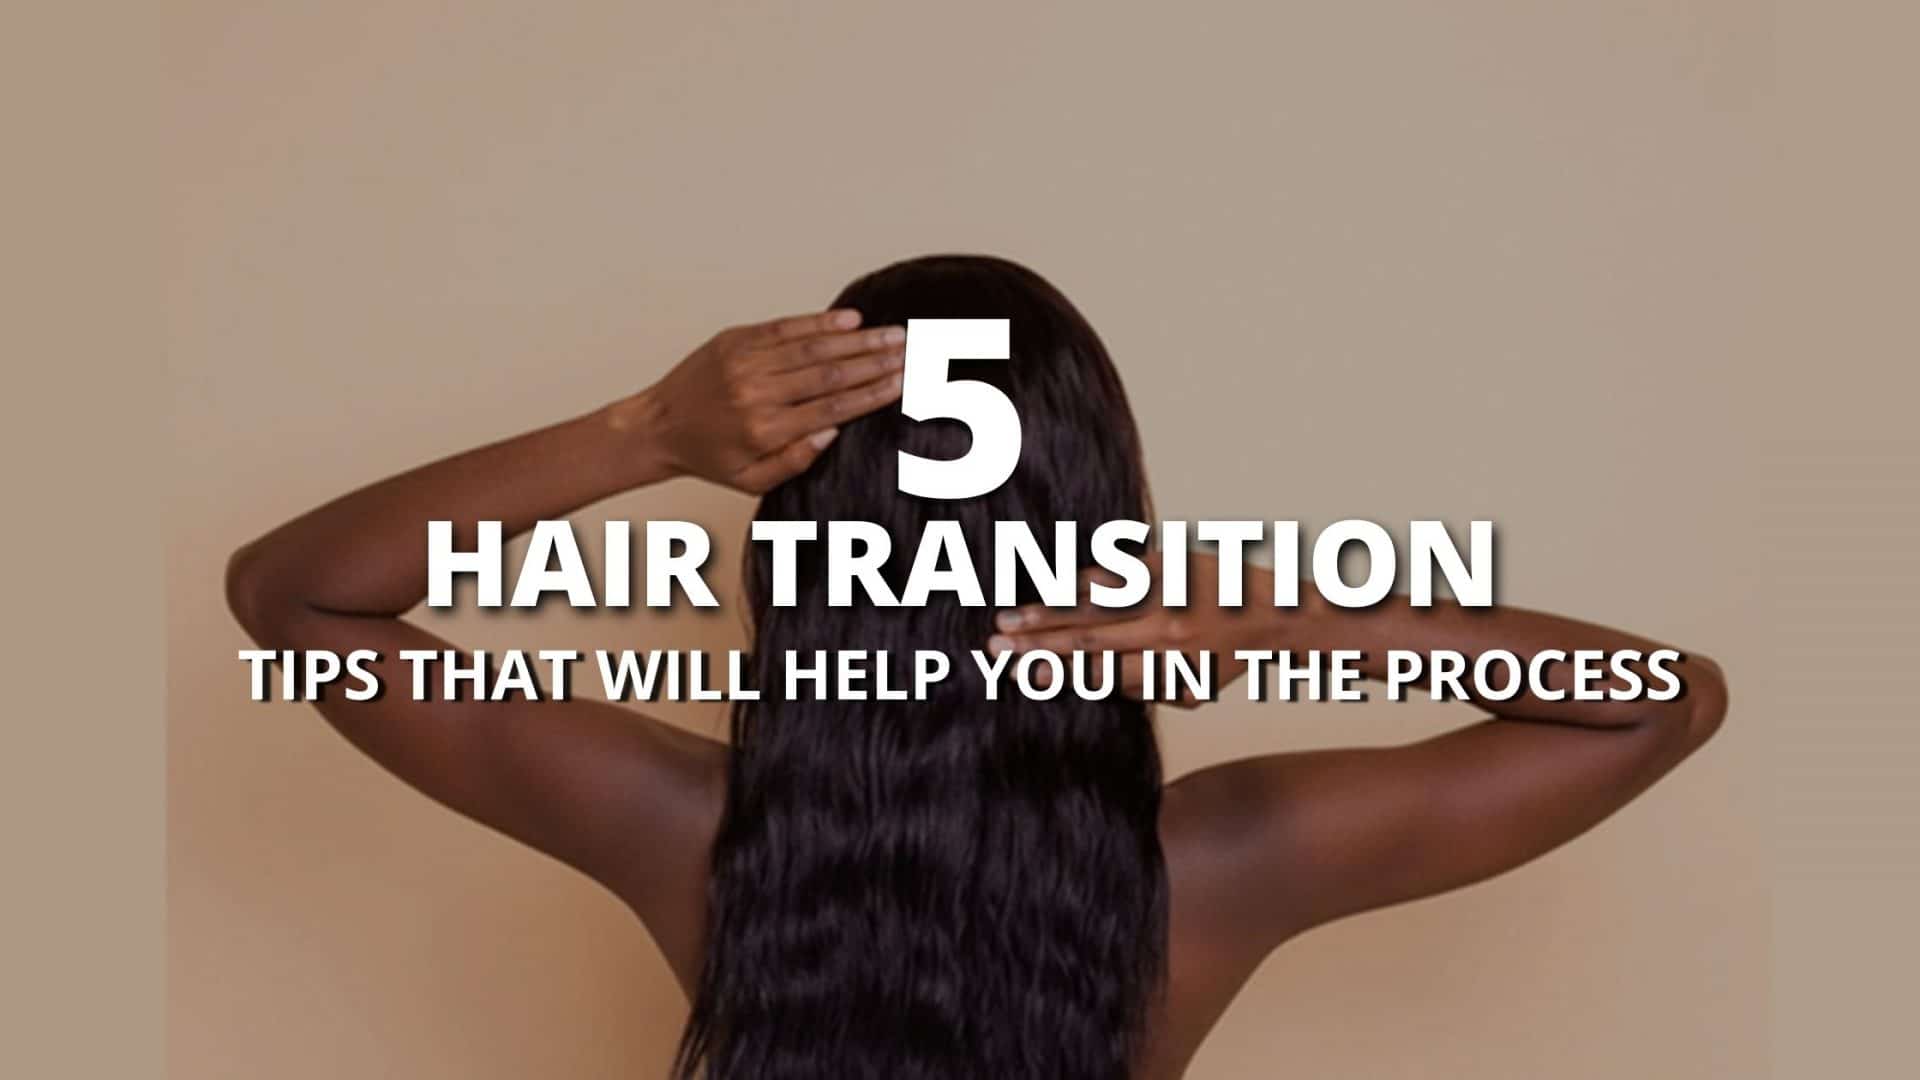 Hair Transition: 5 Tips that will help you in the process